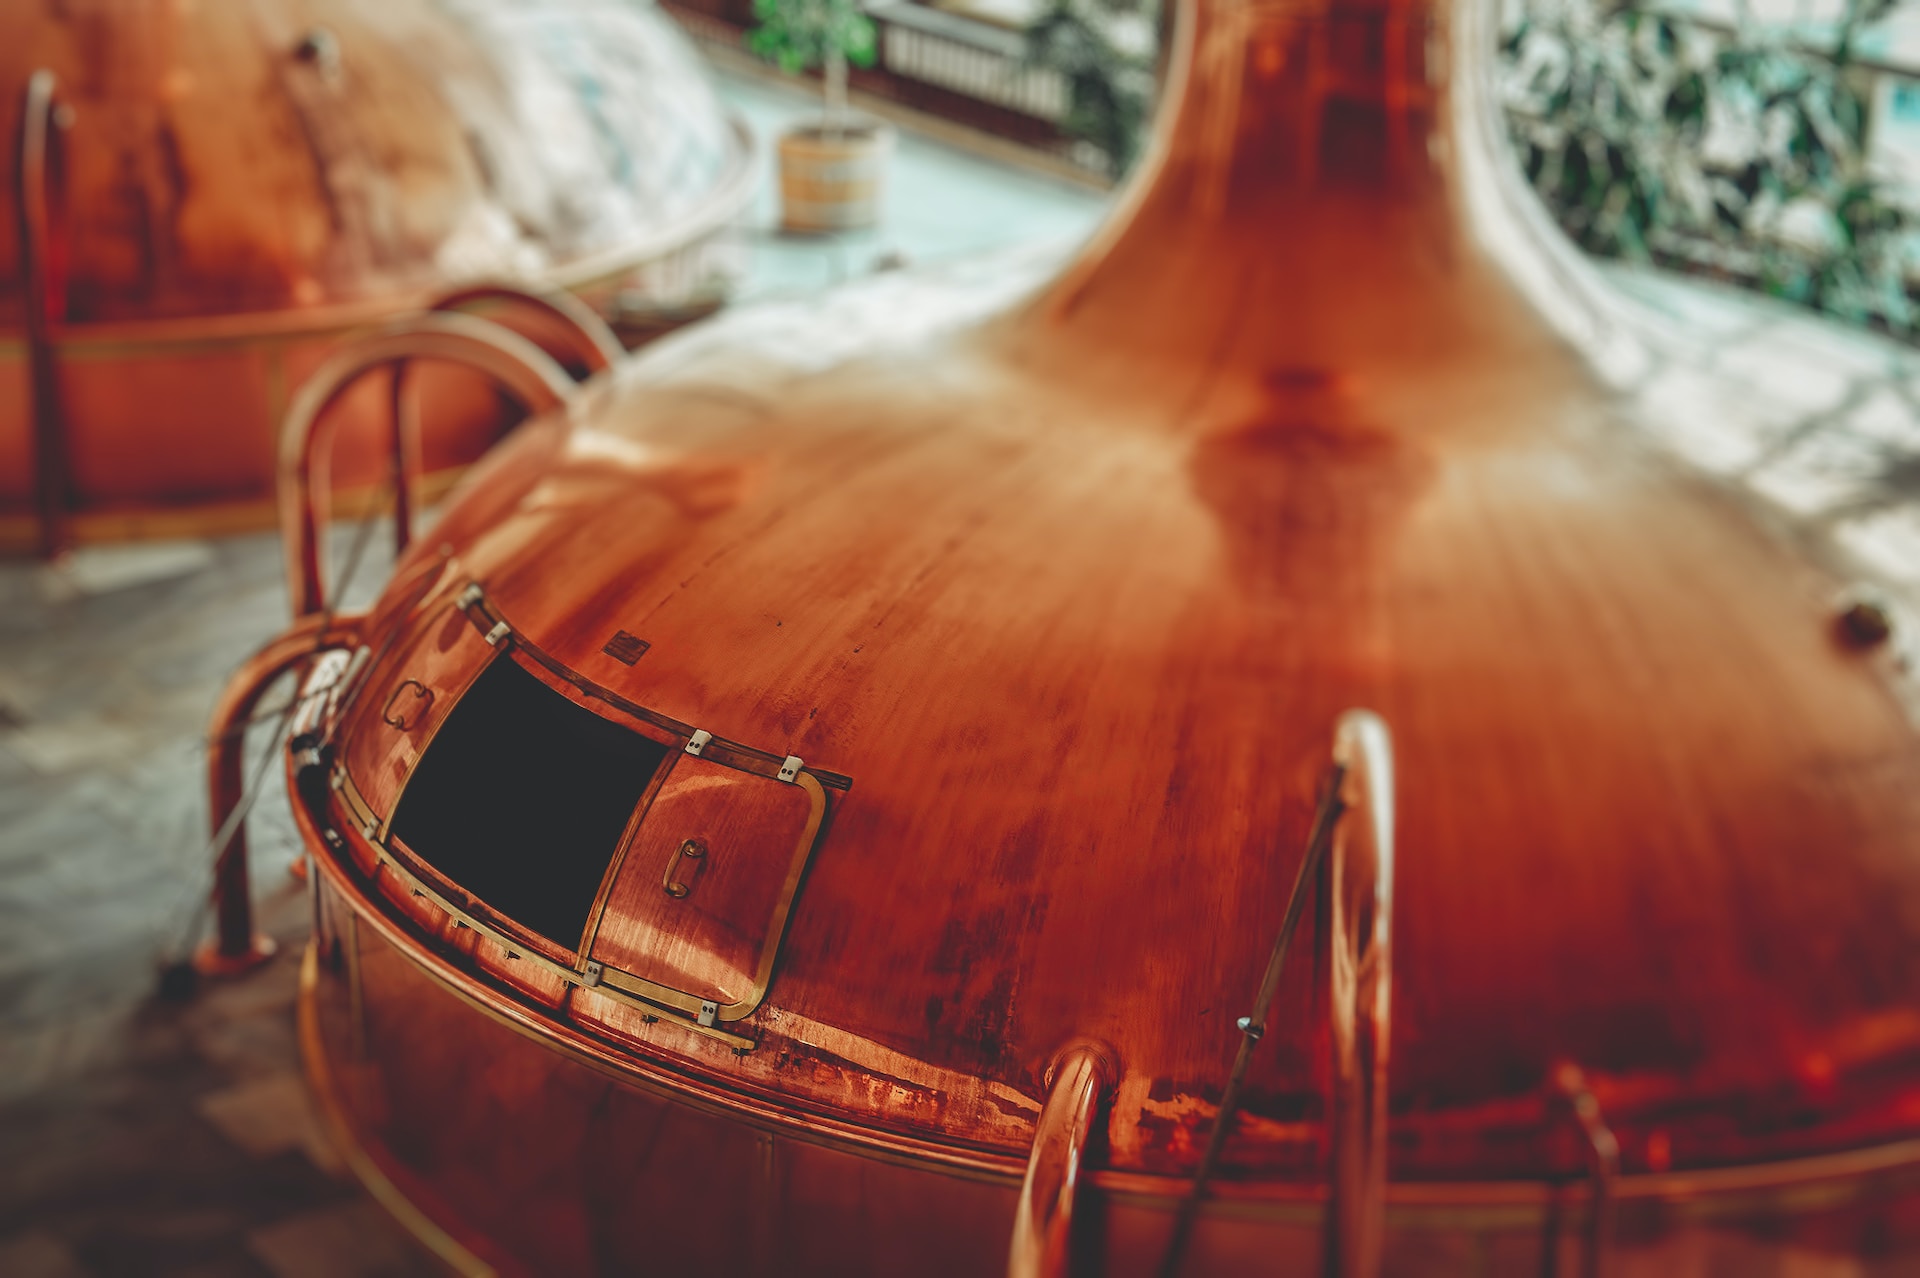 Scottish distilling industry manufacturer to double capacity and boost turnover by £4.3m with HIE funding